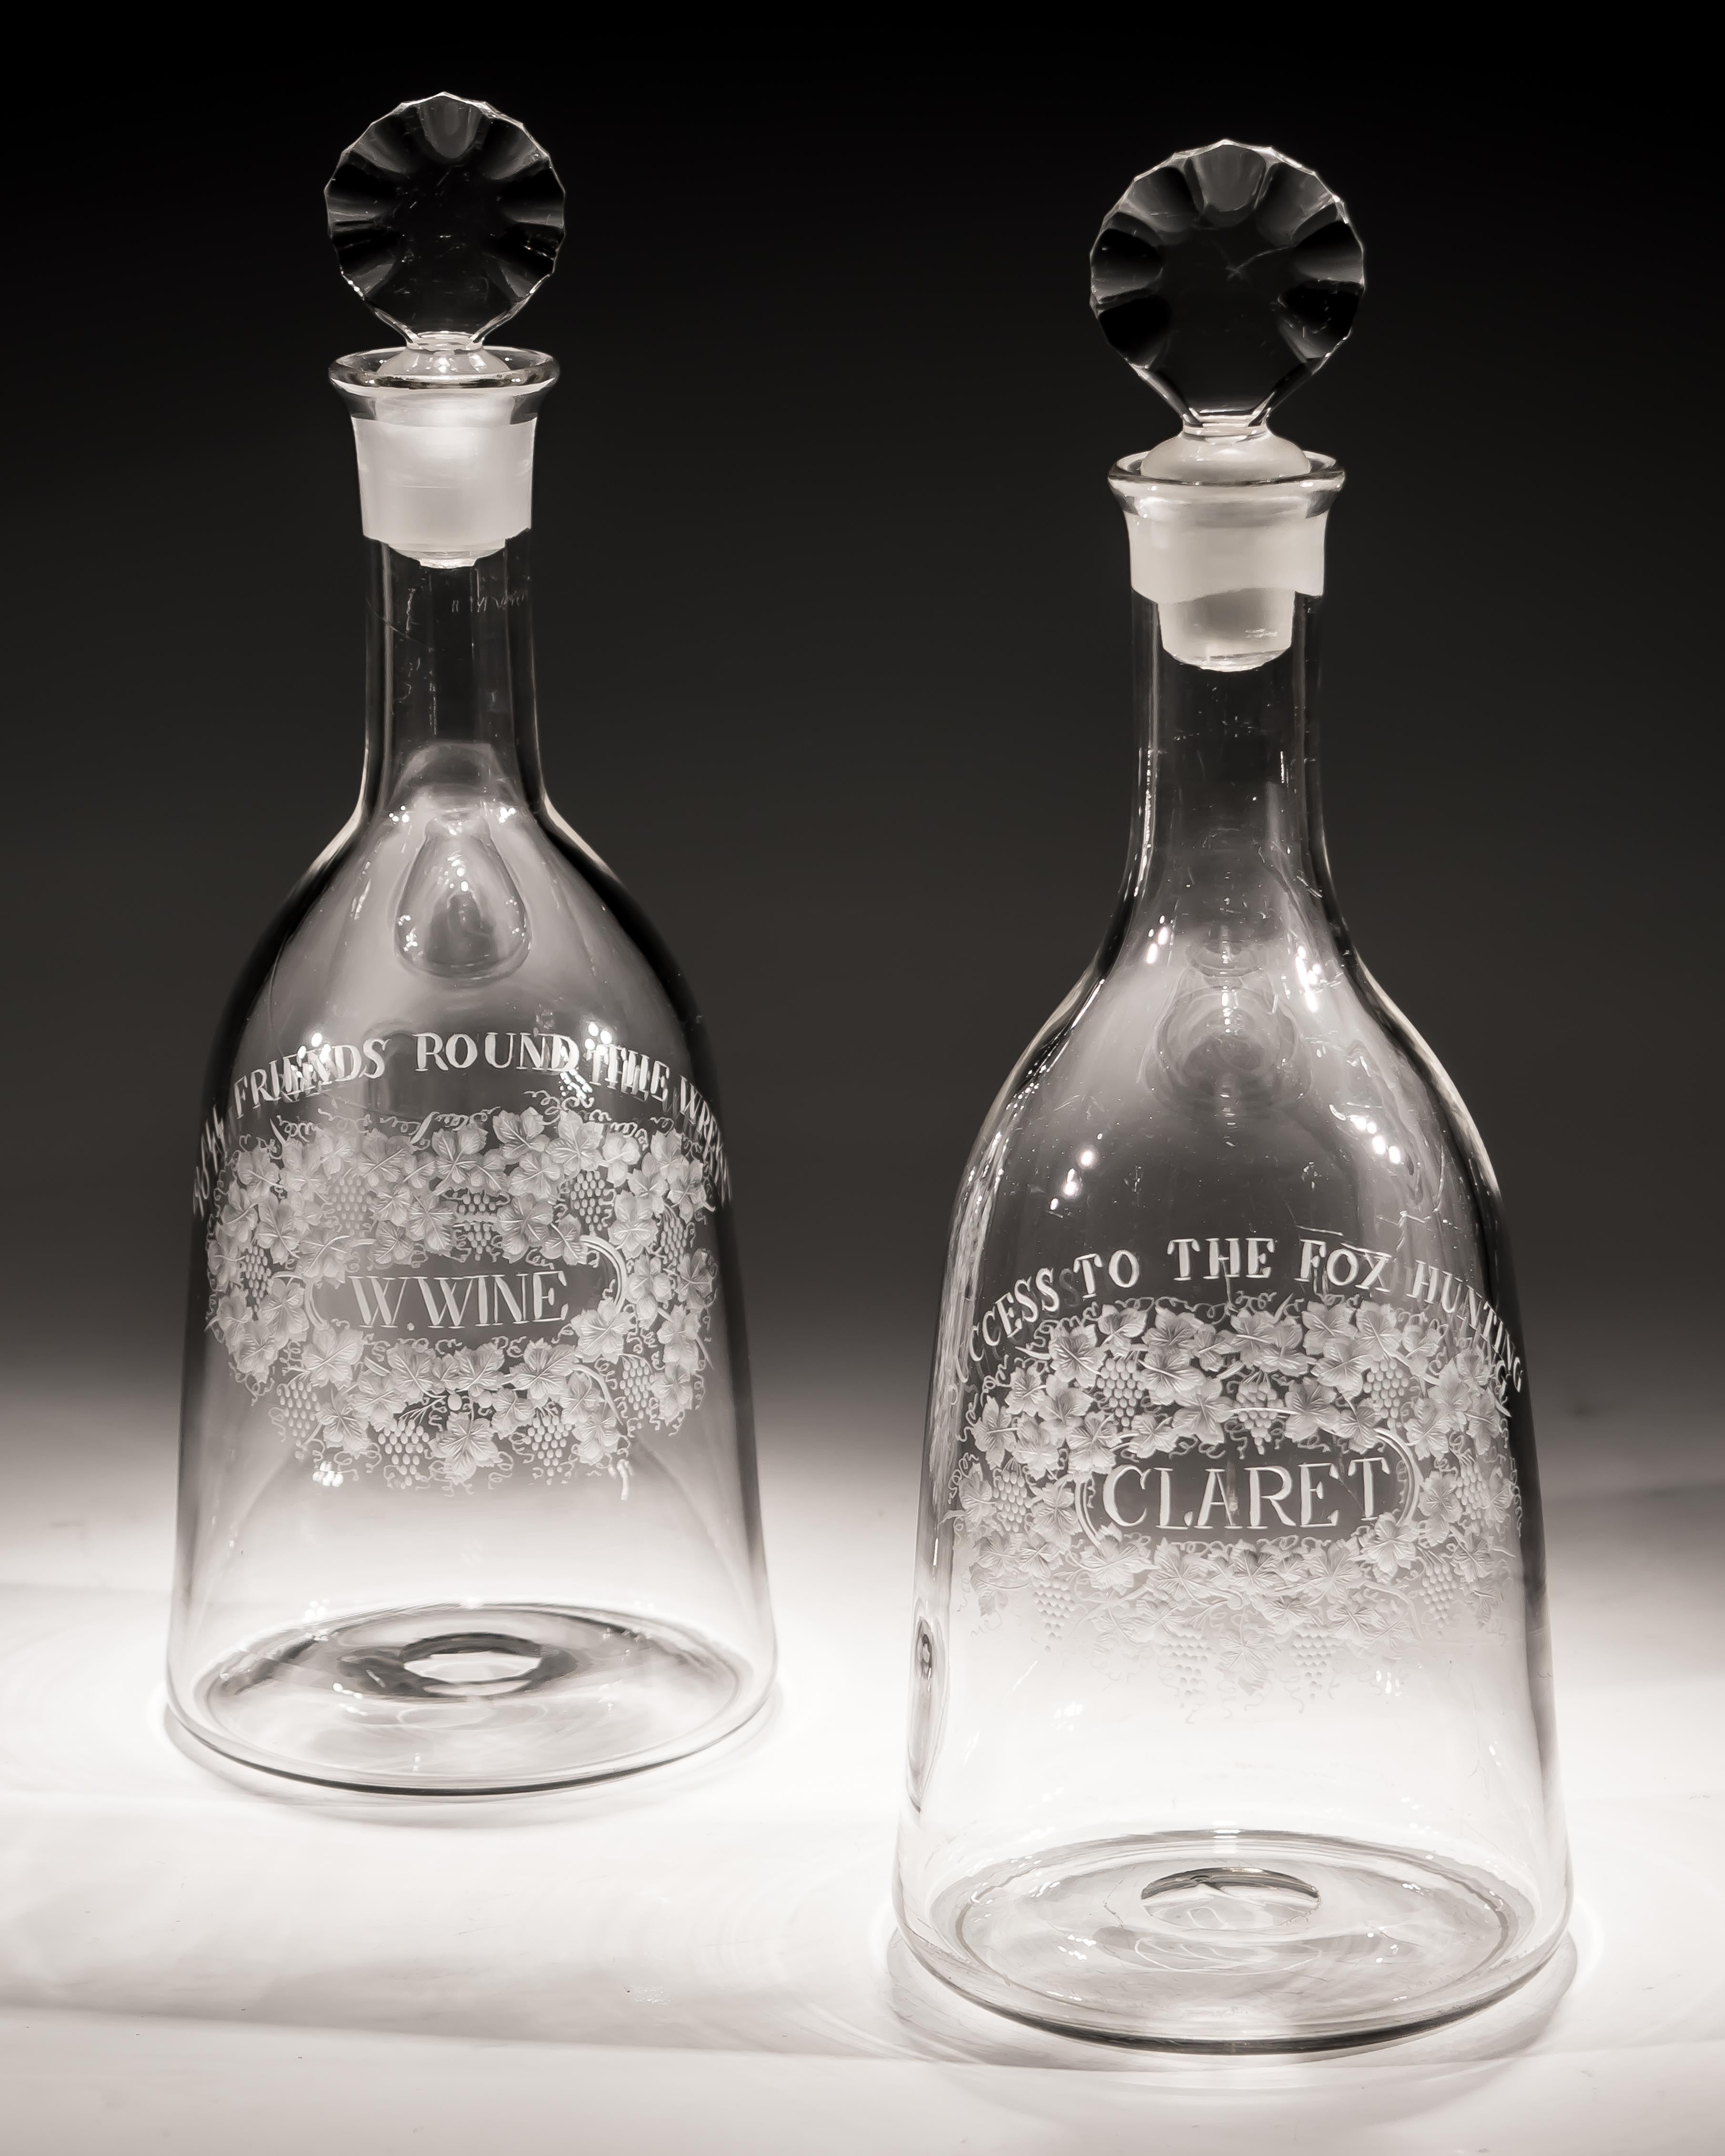 A pair of mallet decanters finely engraved with 'w.wine' & 'claret' labels surrounded with fruit and vines with titles 'Success to the fox hunting' & 'To all friends round the wrekin'.